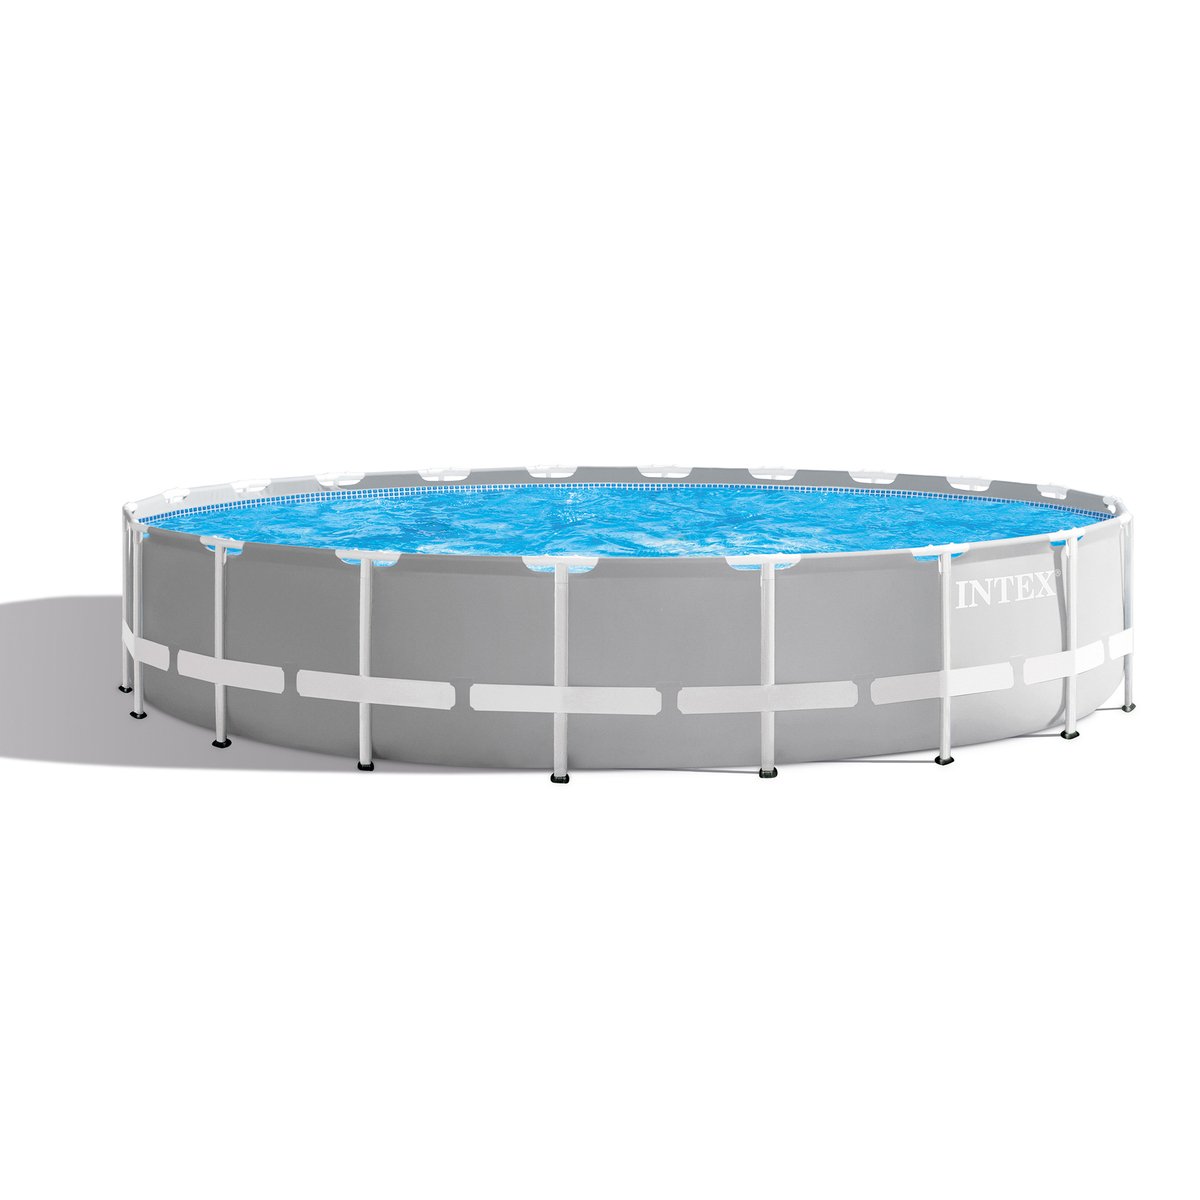 Intex Prism Frame Round Above Ground Pool  26756 20Ft